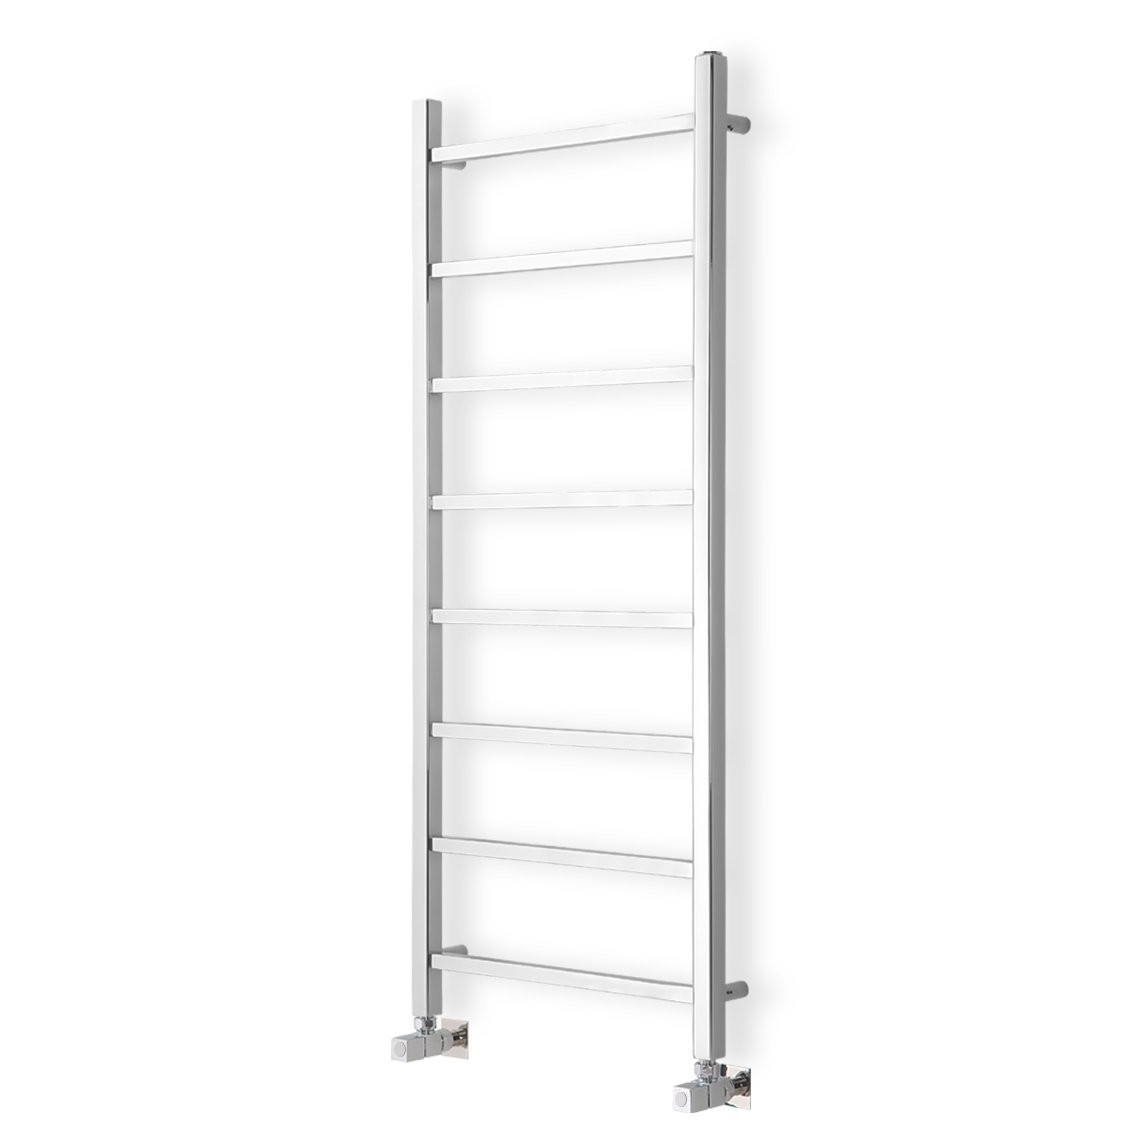 1250mm x 520mm Diva Stainless Stell Towel Warmer Polished